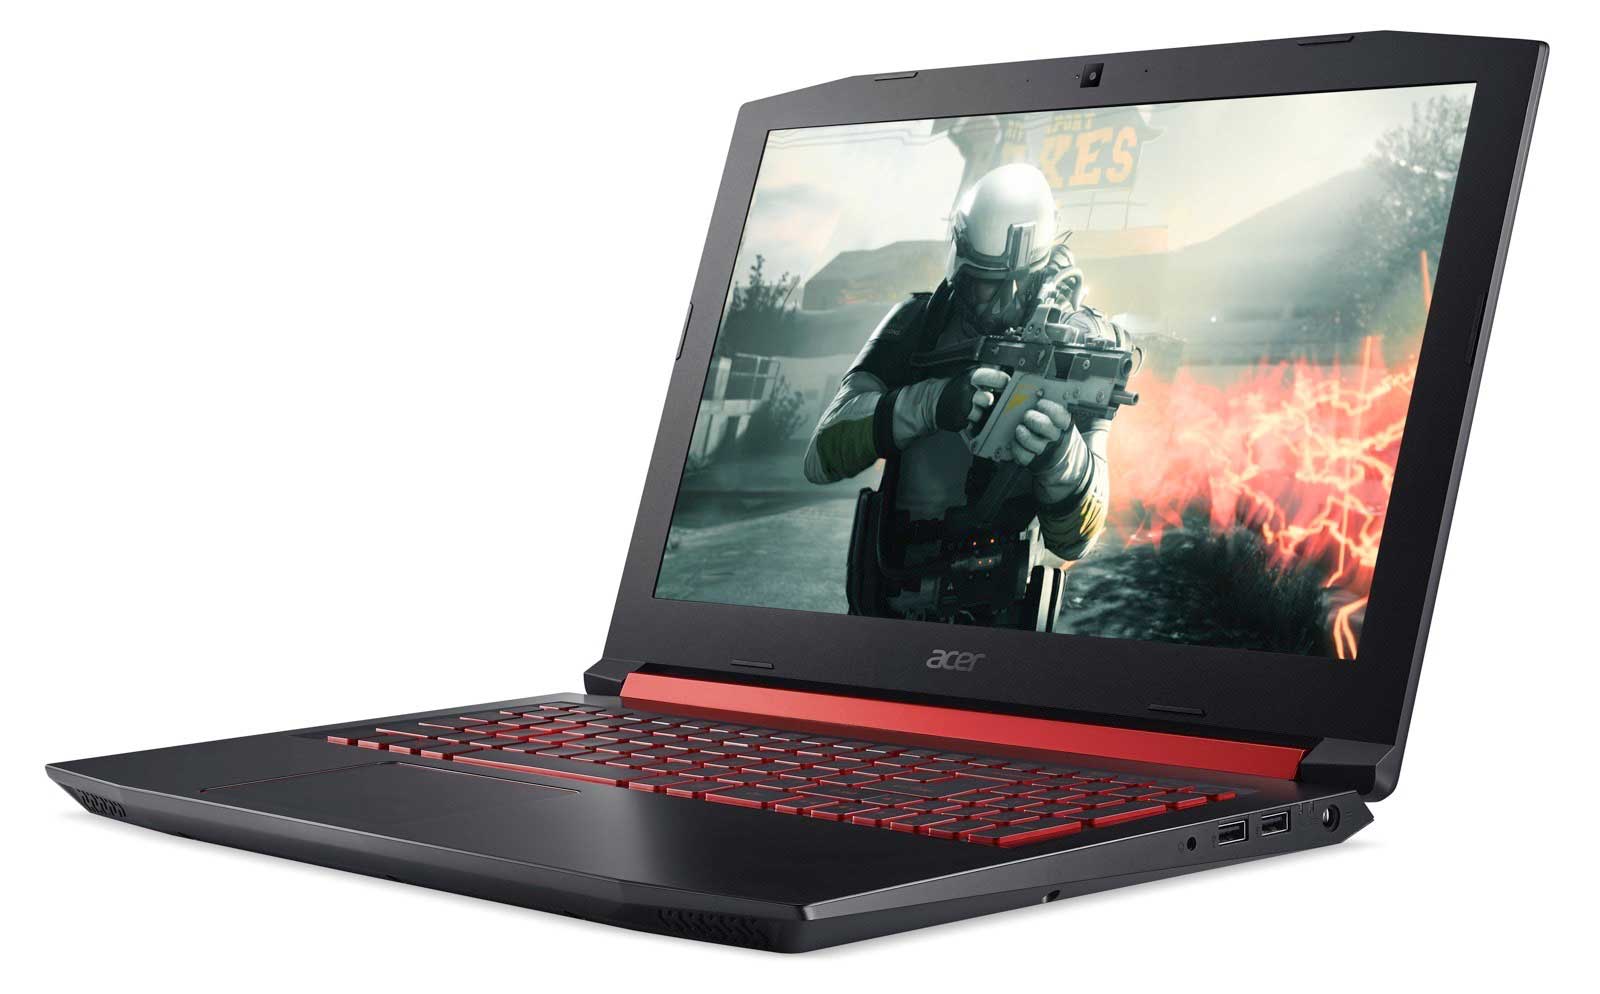 Computex 2017: Acer Nitro 5, Spin 1, Iconia Tab 10, and Iconia One 10